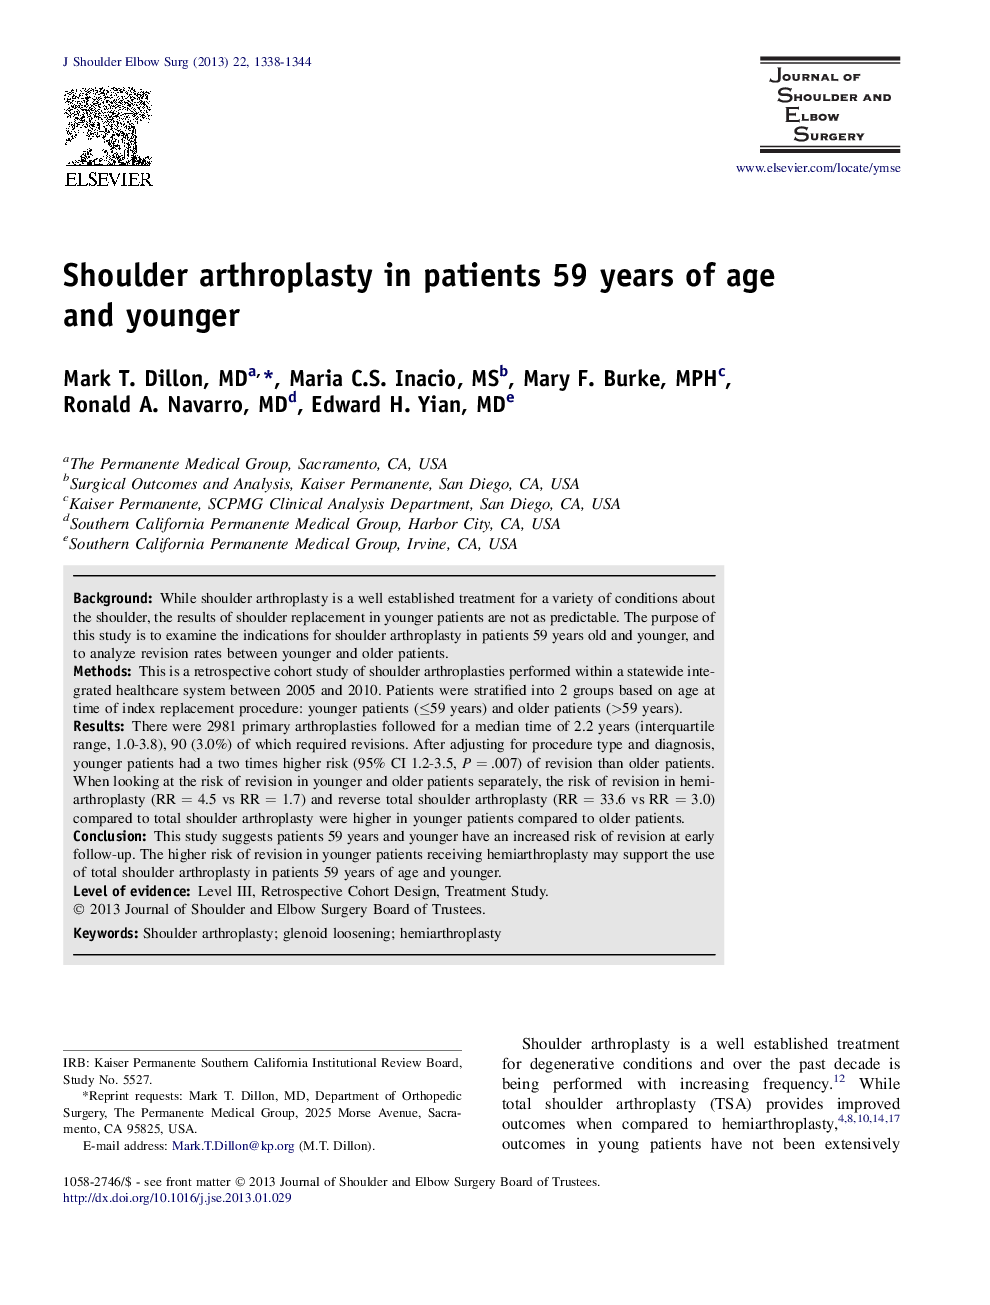 Shoulder arthroplasty in patients 59 years of age and younger 